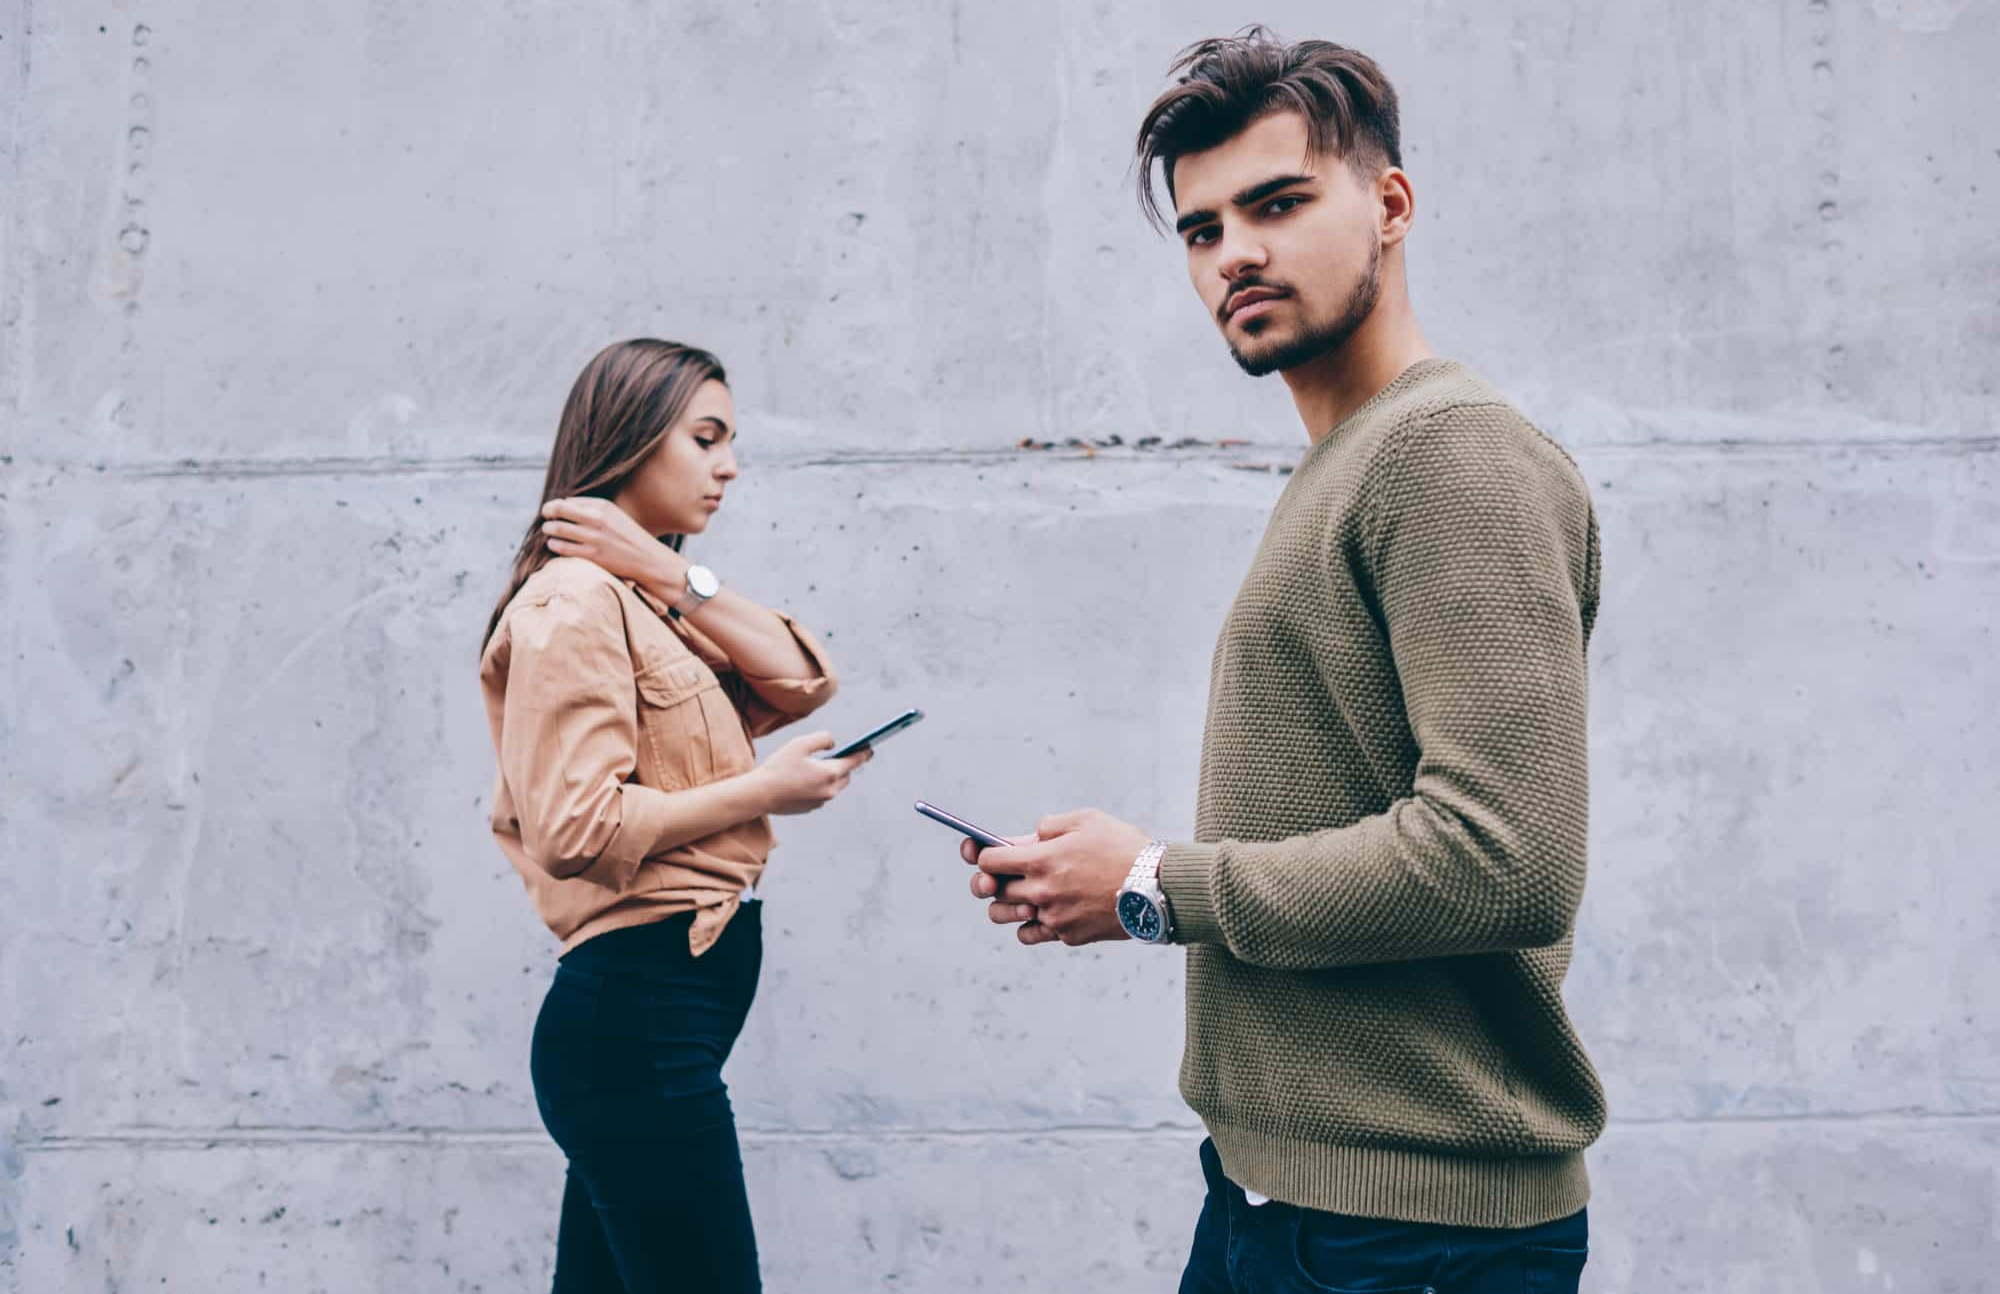 A Cancerian man walks while clutching a phone and ignoring a girl who is also carrying a phone